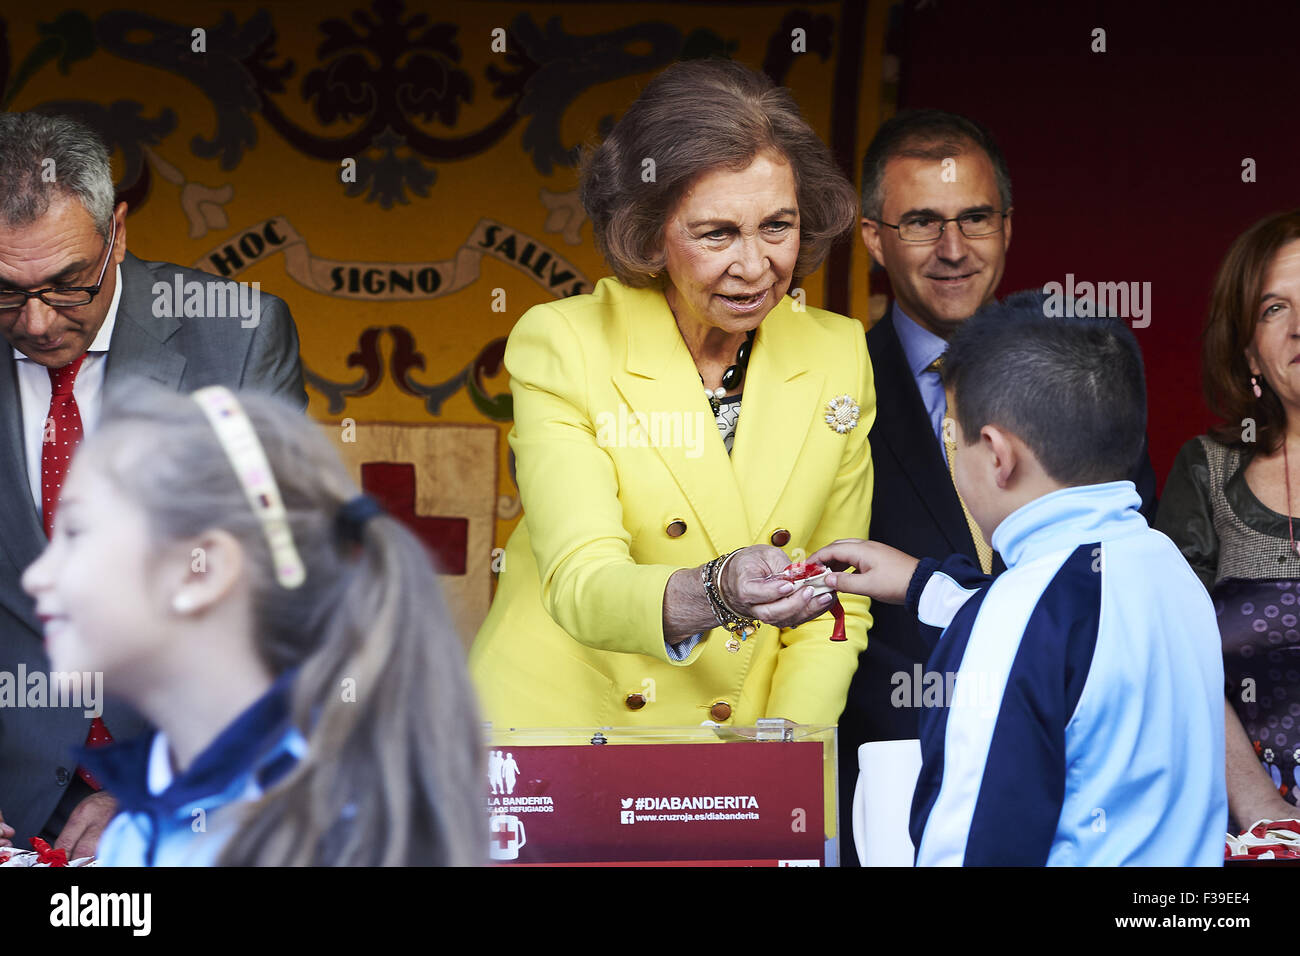 Madrid, Spain. 2nd Oct, 2015. Queen Sofia of Spain at the Red Cross fundraising event at Puerta del Sol on Little Flag Day ('Fiesta de la Banderita'), in Madrid, Spain. Credit:  Jack Abuin/ZUMA Wire/Alamy Live News Stock Photo